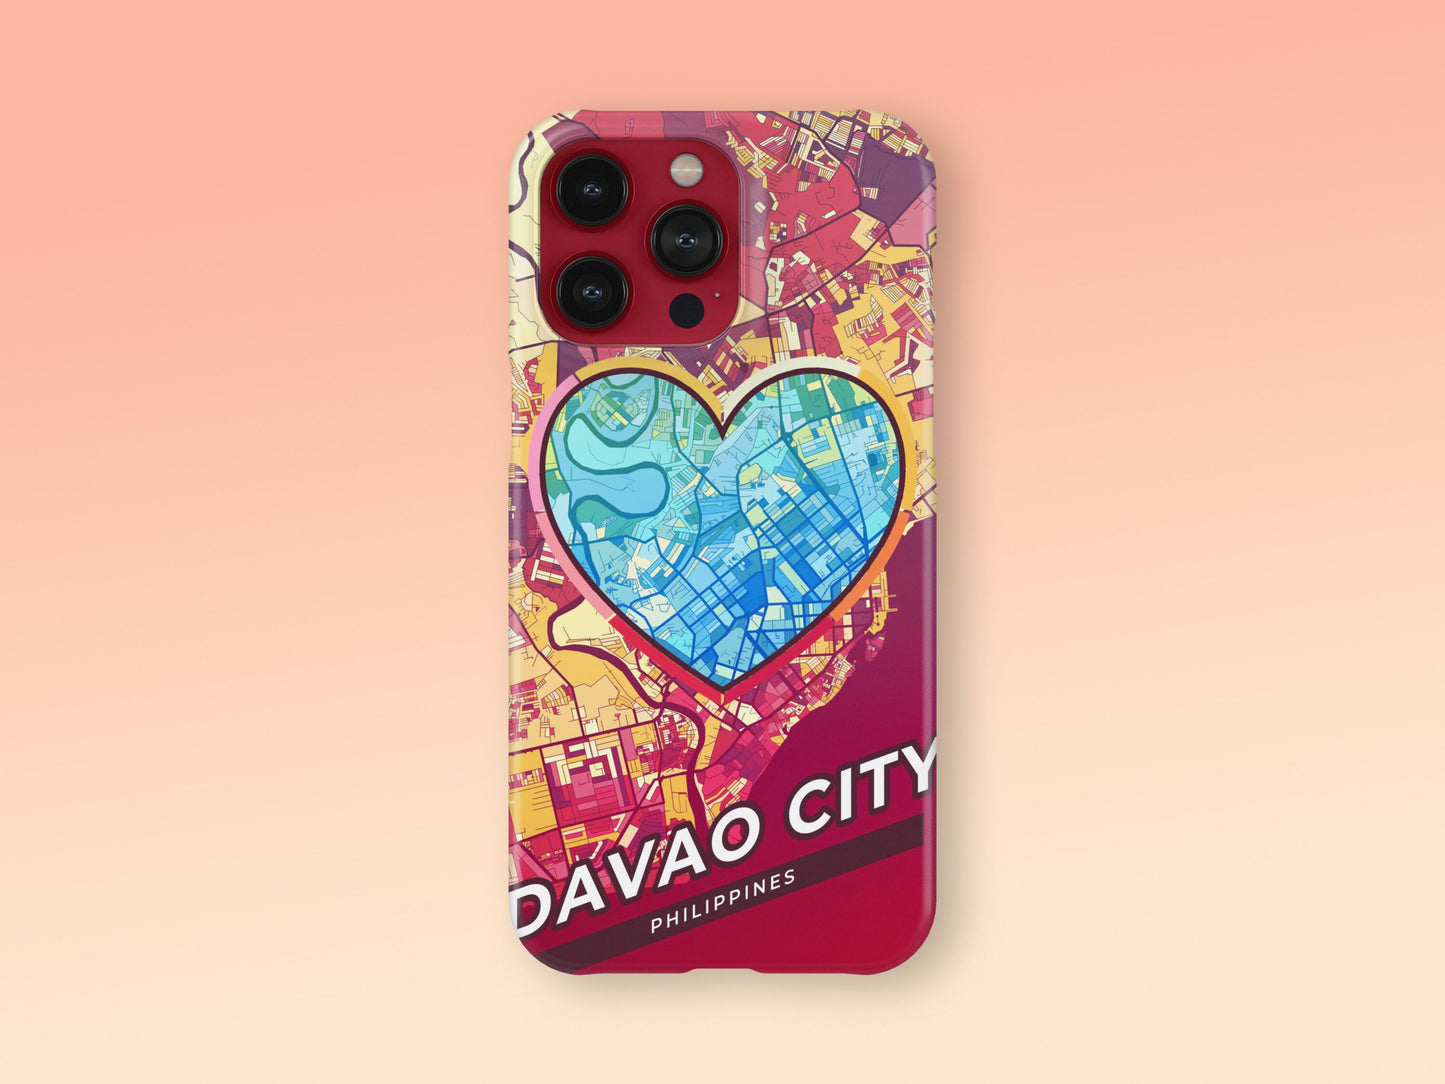 Davao City Philippines slim phone case with colorful icon. Birthday, wedding or housewarming gift. Couple match cases. 2